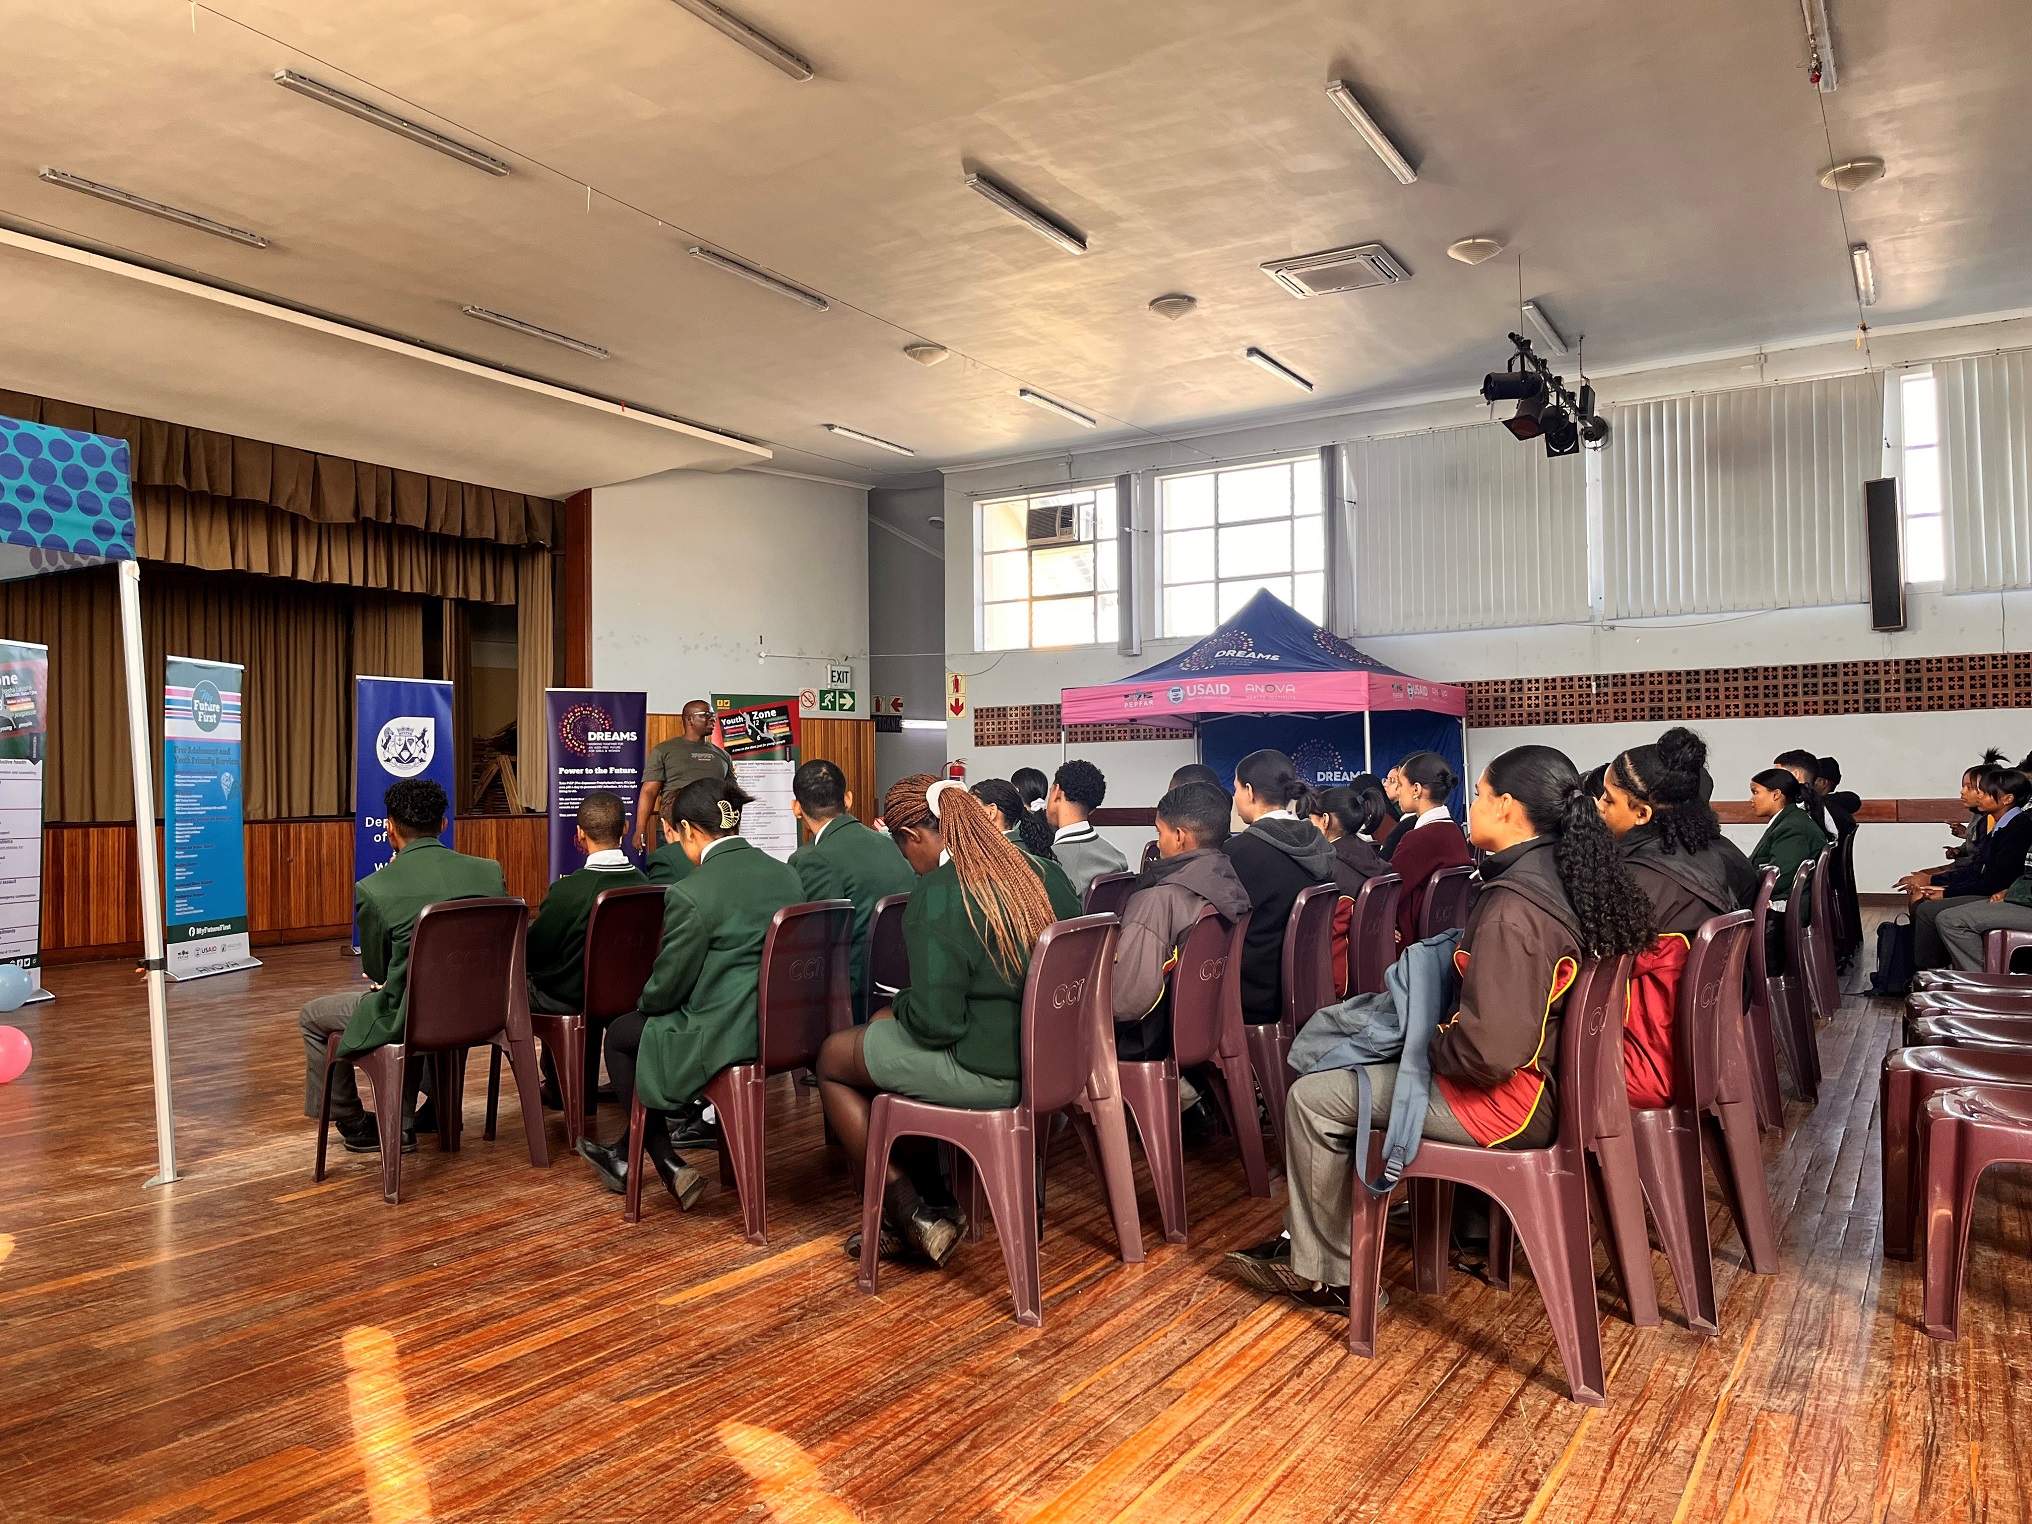 Young people were engaged in several talks with NPOs and the Department of Health and Wellness at the launch of the new youth-friendly clinic at the CDC.